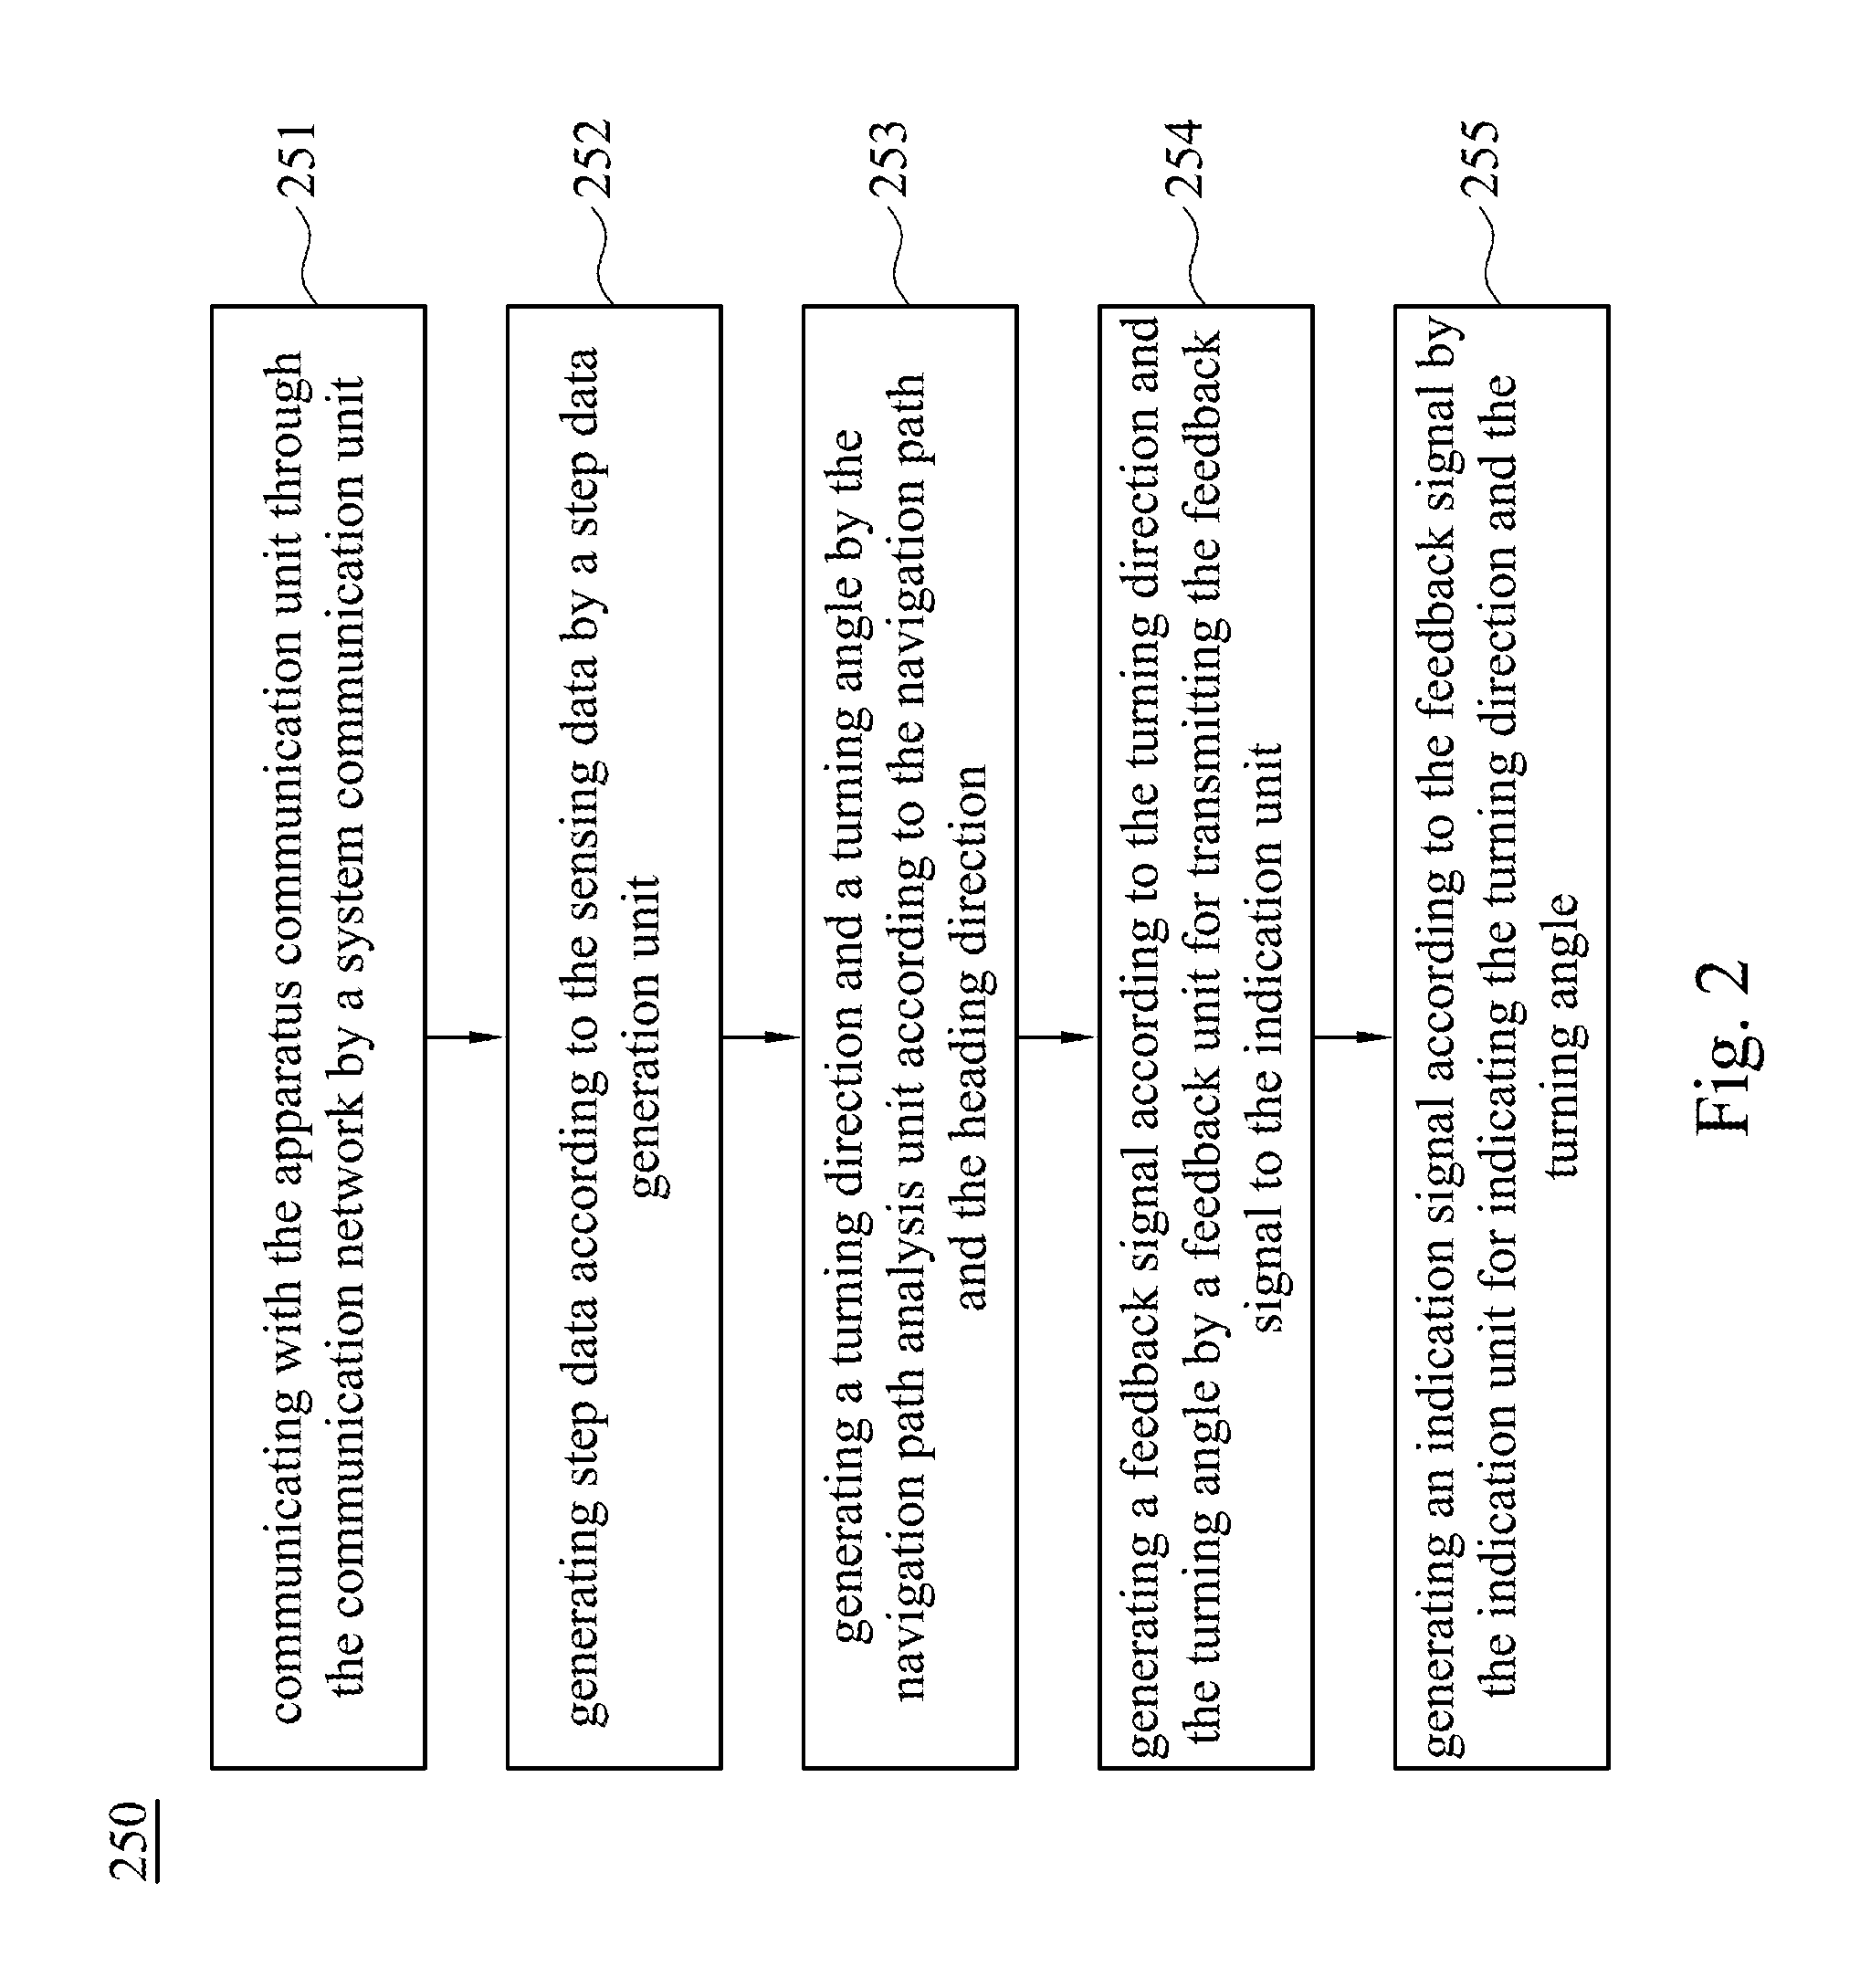 Pedestrian navigation system and method thereof